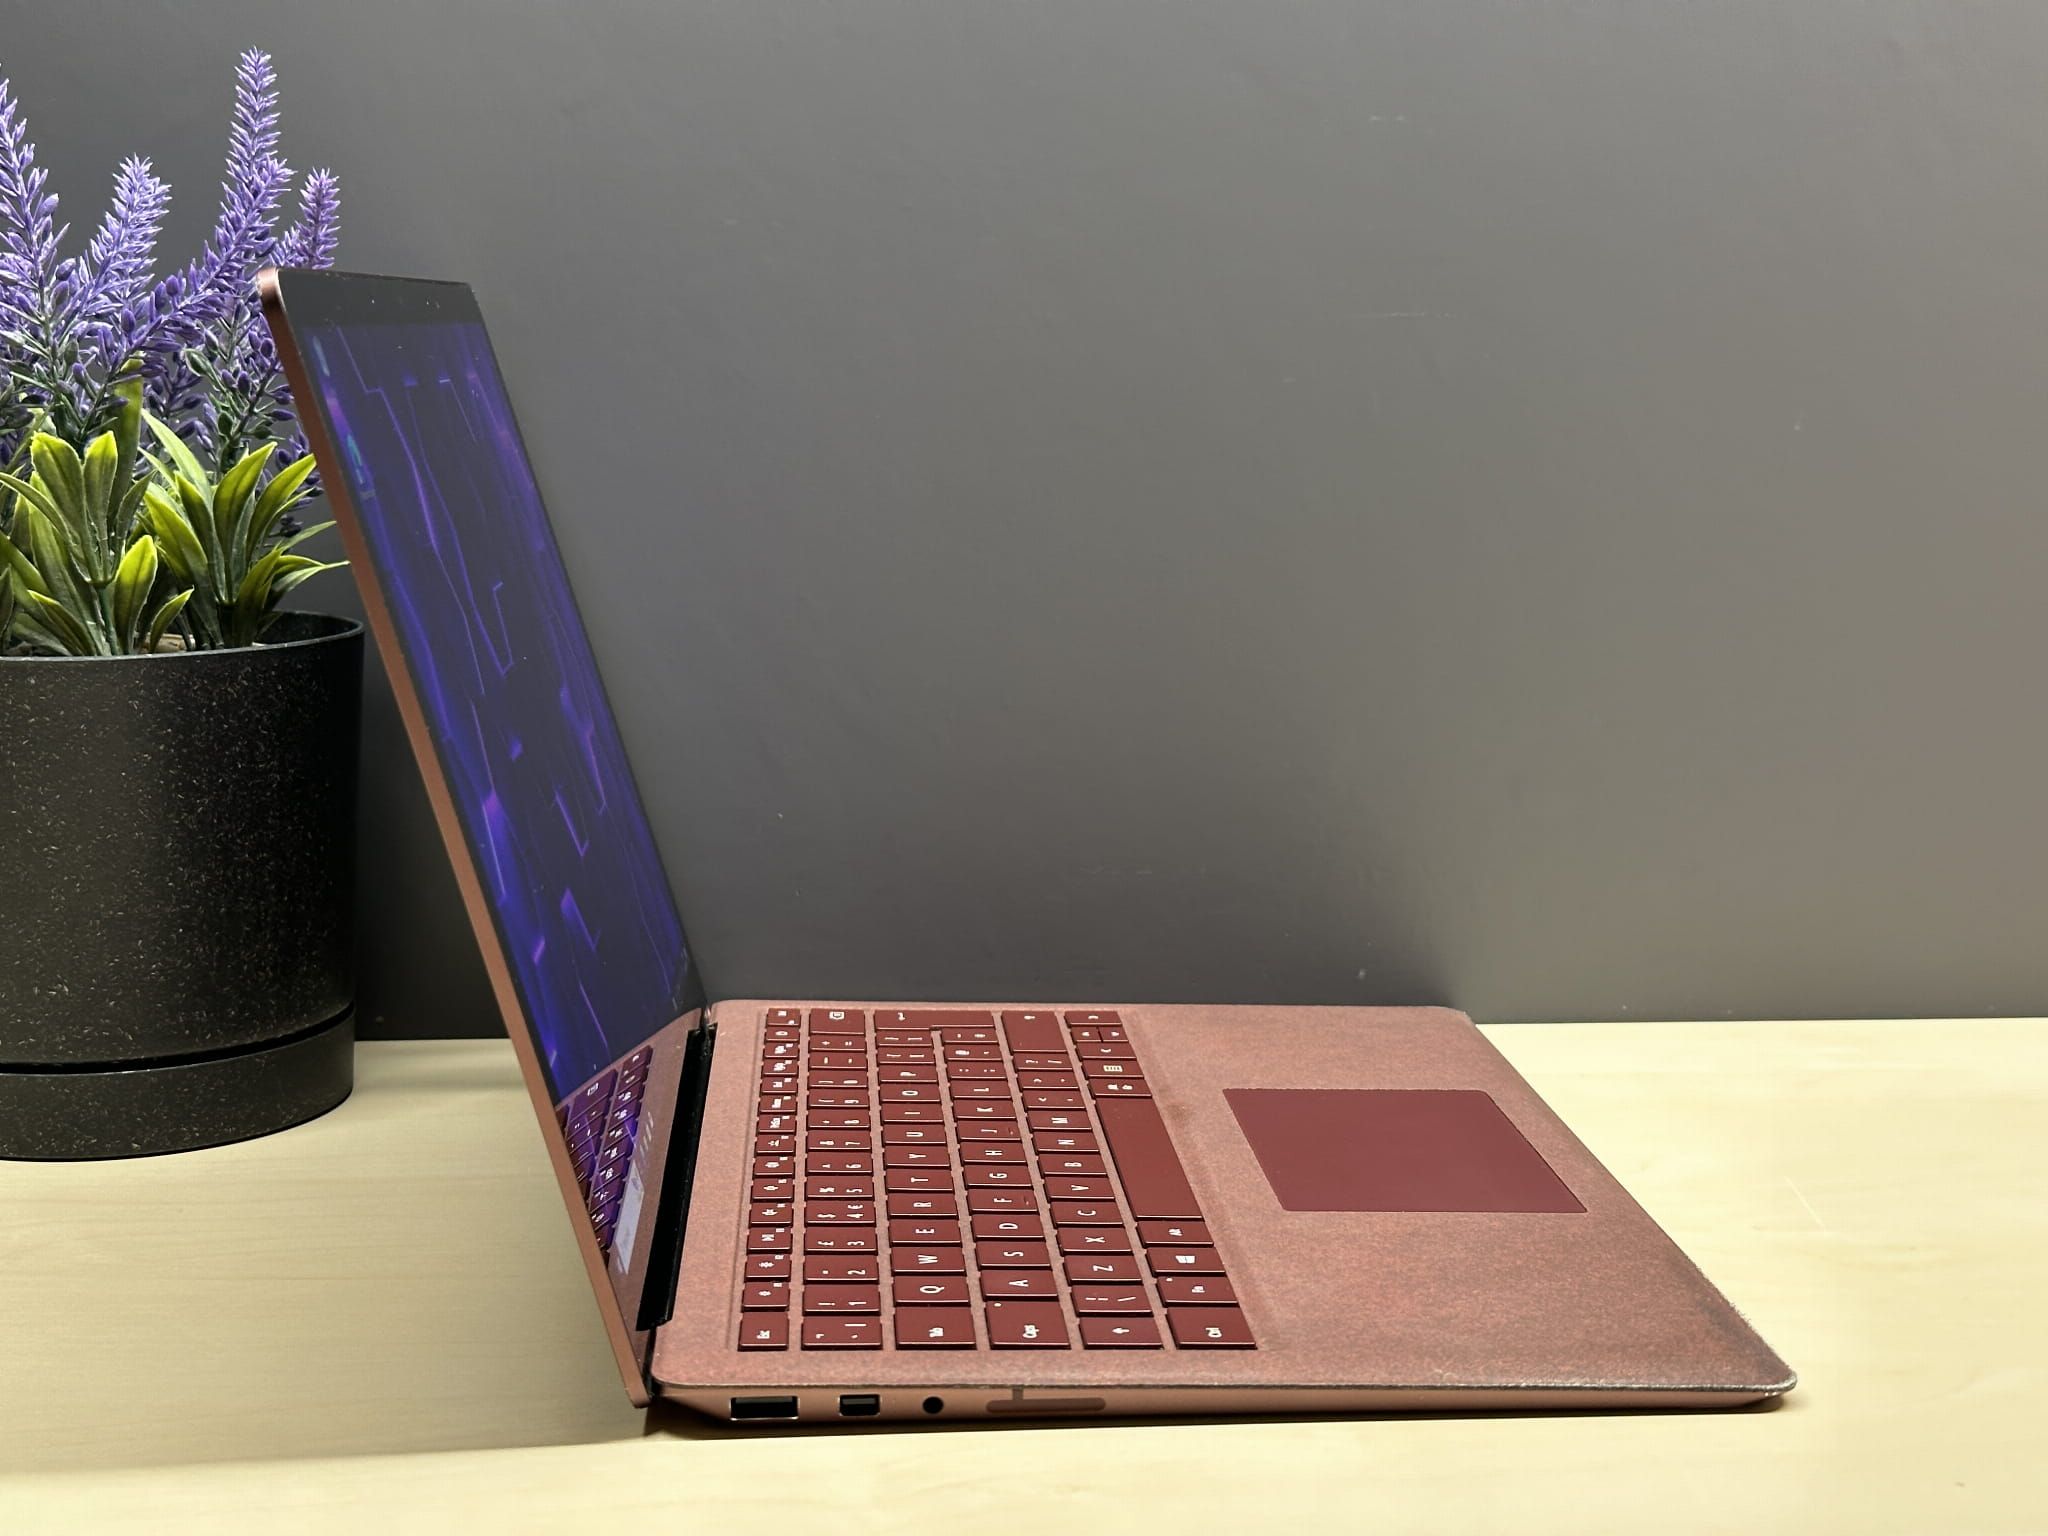 Laptop Microsoft Surface Laptop 2 | i7-8650U / 16GB/512GB/FHD/ OUTLET